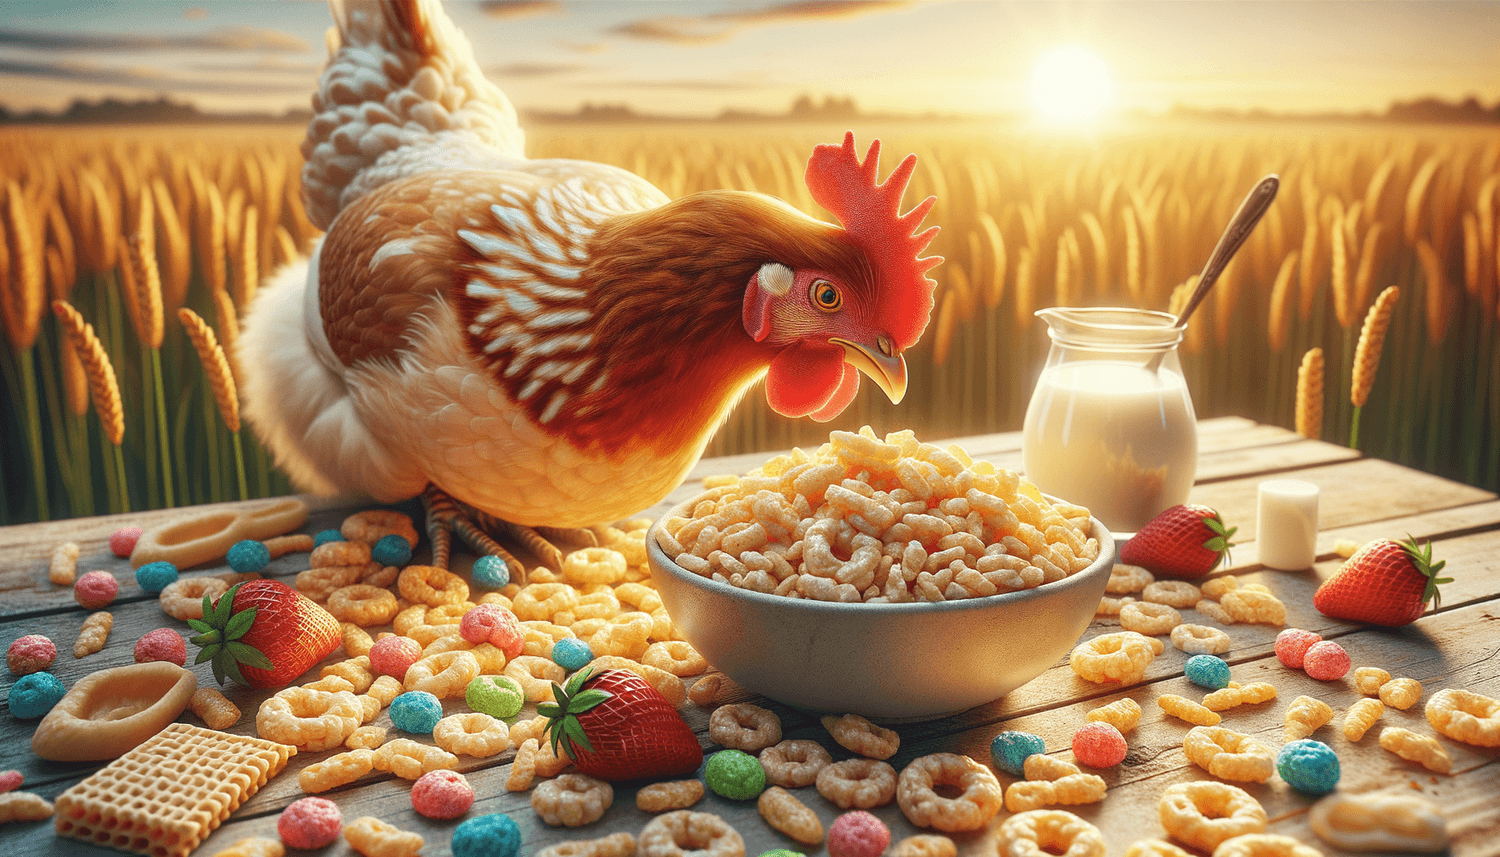 Can Chickens Eat Rice Krispies Cereal?